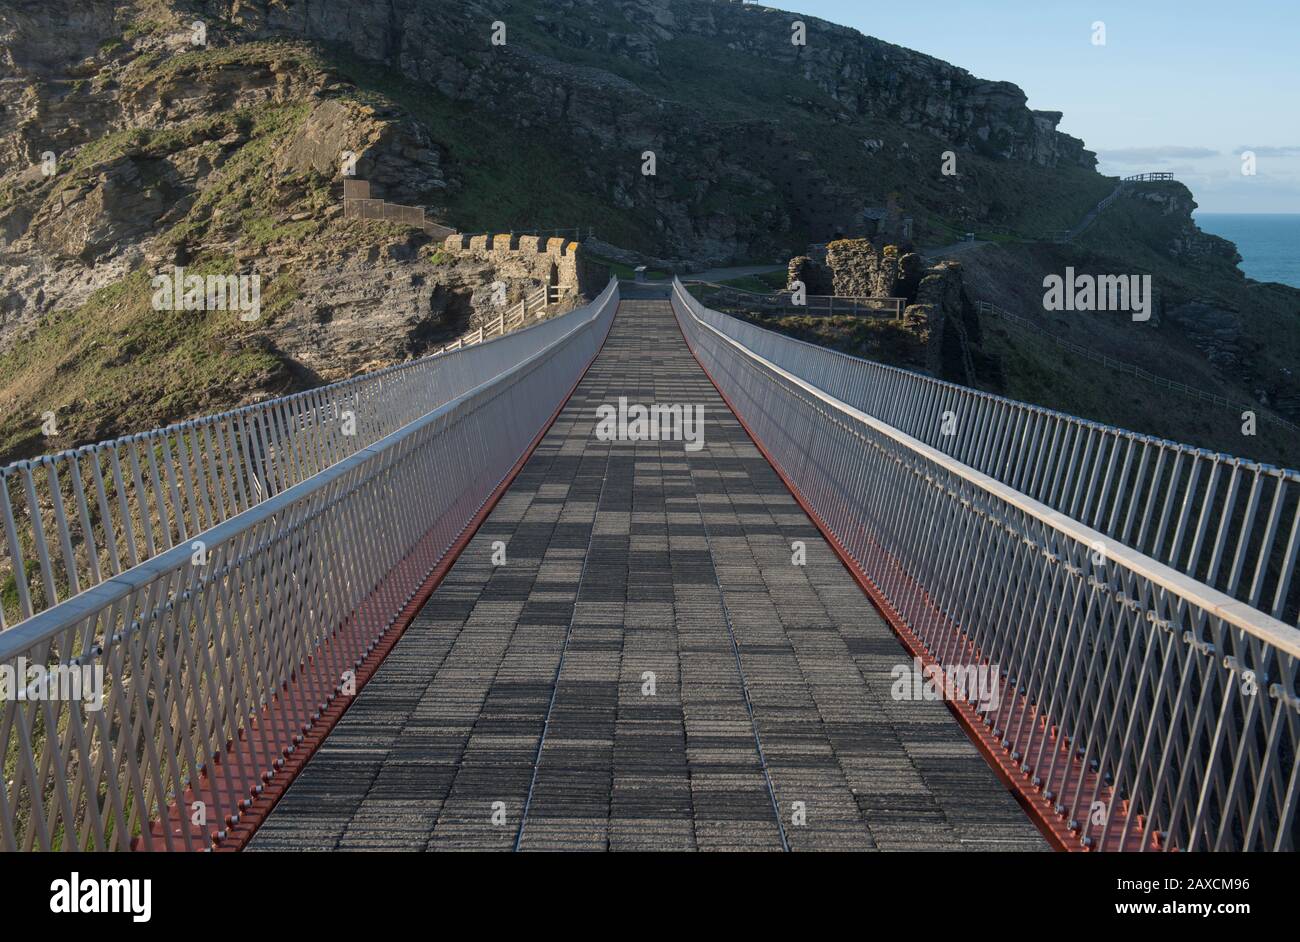 Steel Cantilever Footbridge Linking The Ruins of Tintagel Castle to the Village of Tintagel on the North Cornish Coast in Cornwall, England, UK Stock Photo